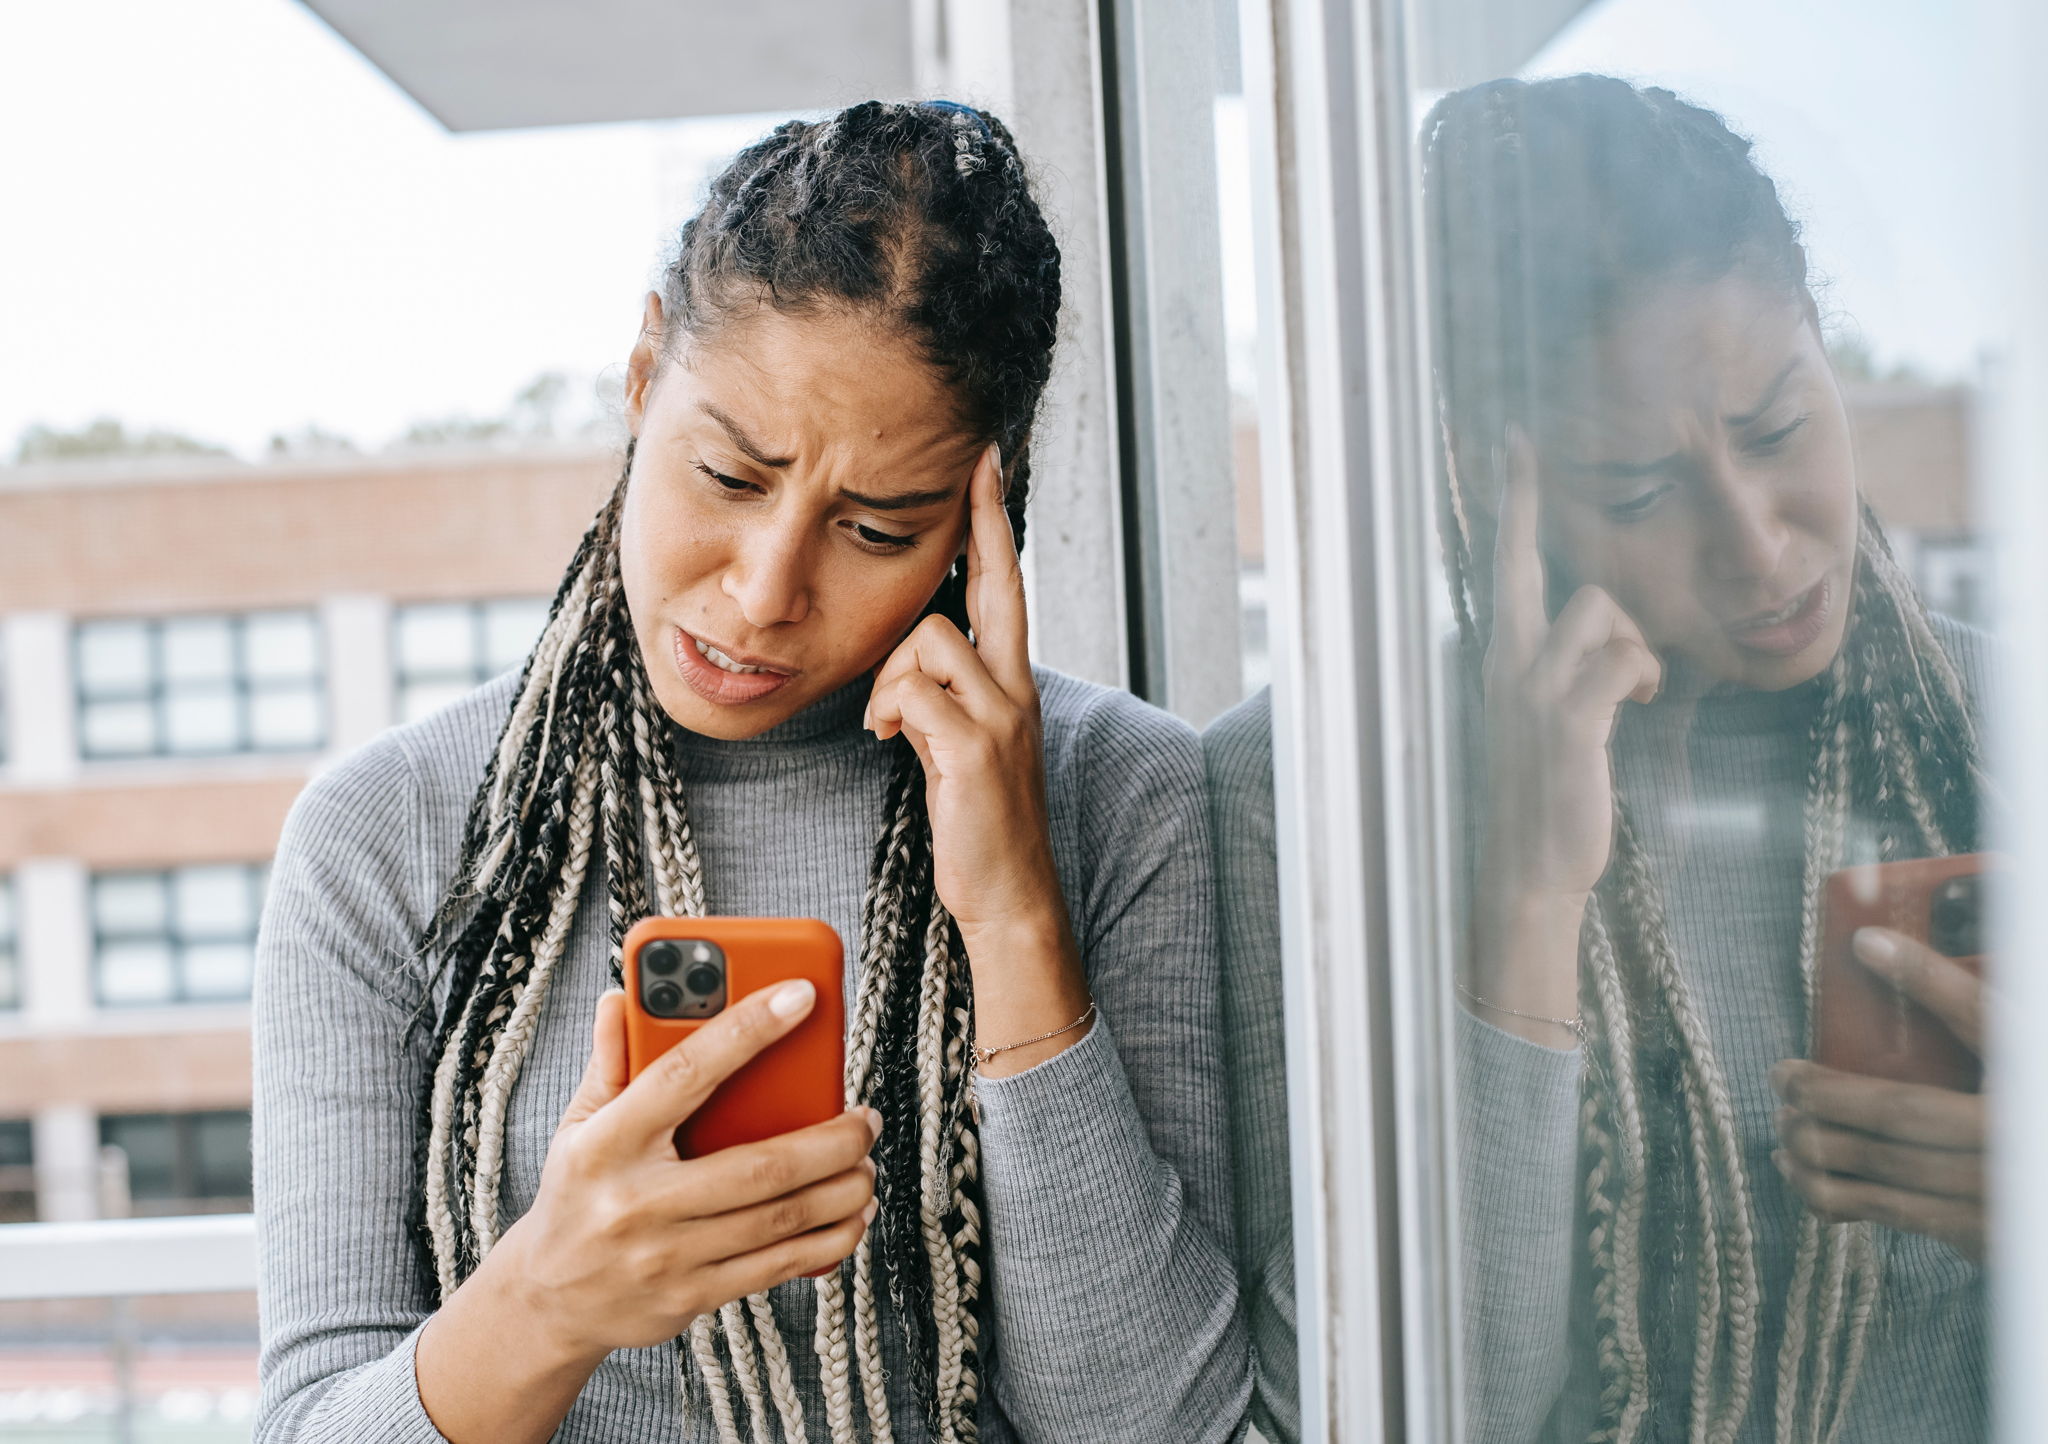 A woman with dreads sits on her patio looking on her phone with a concerned look on her face.